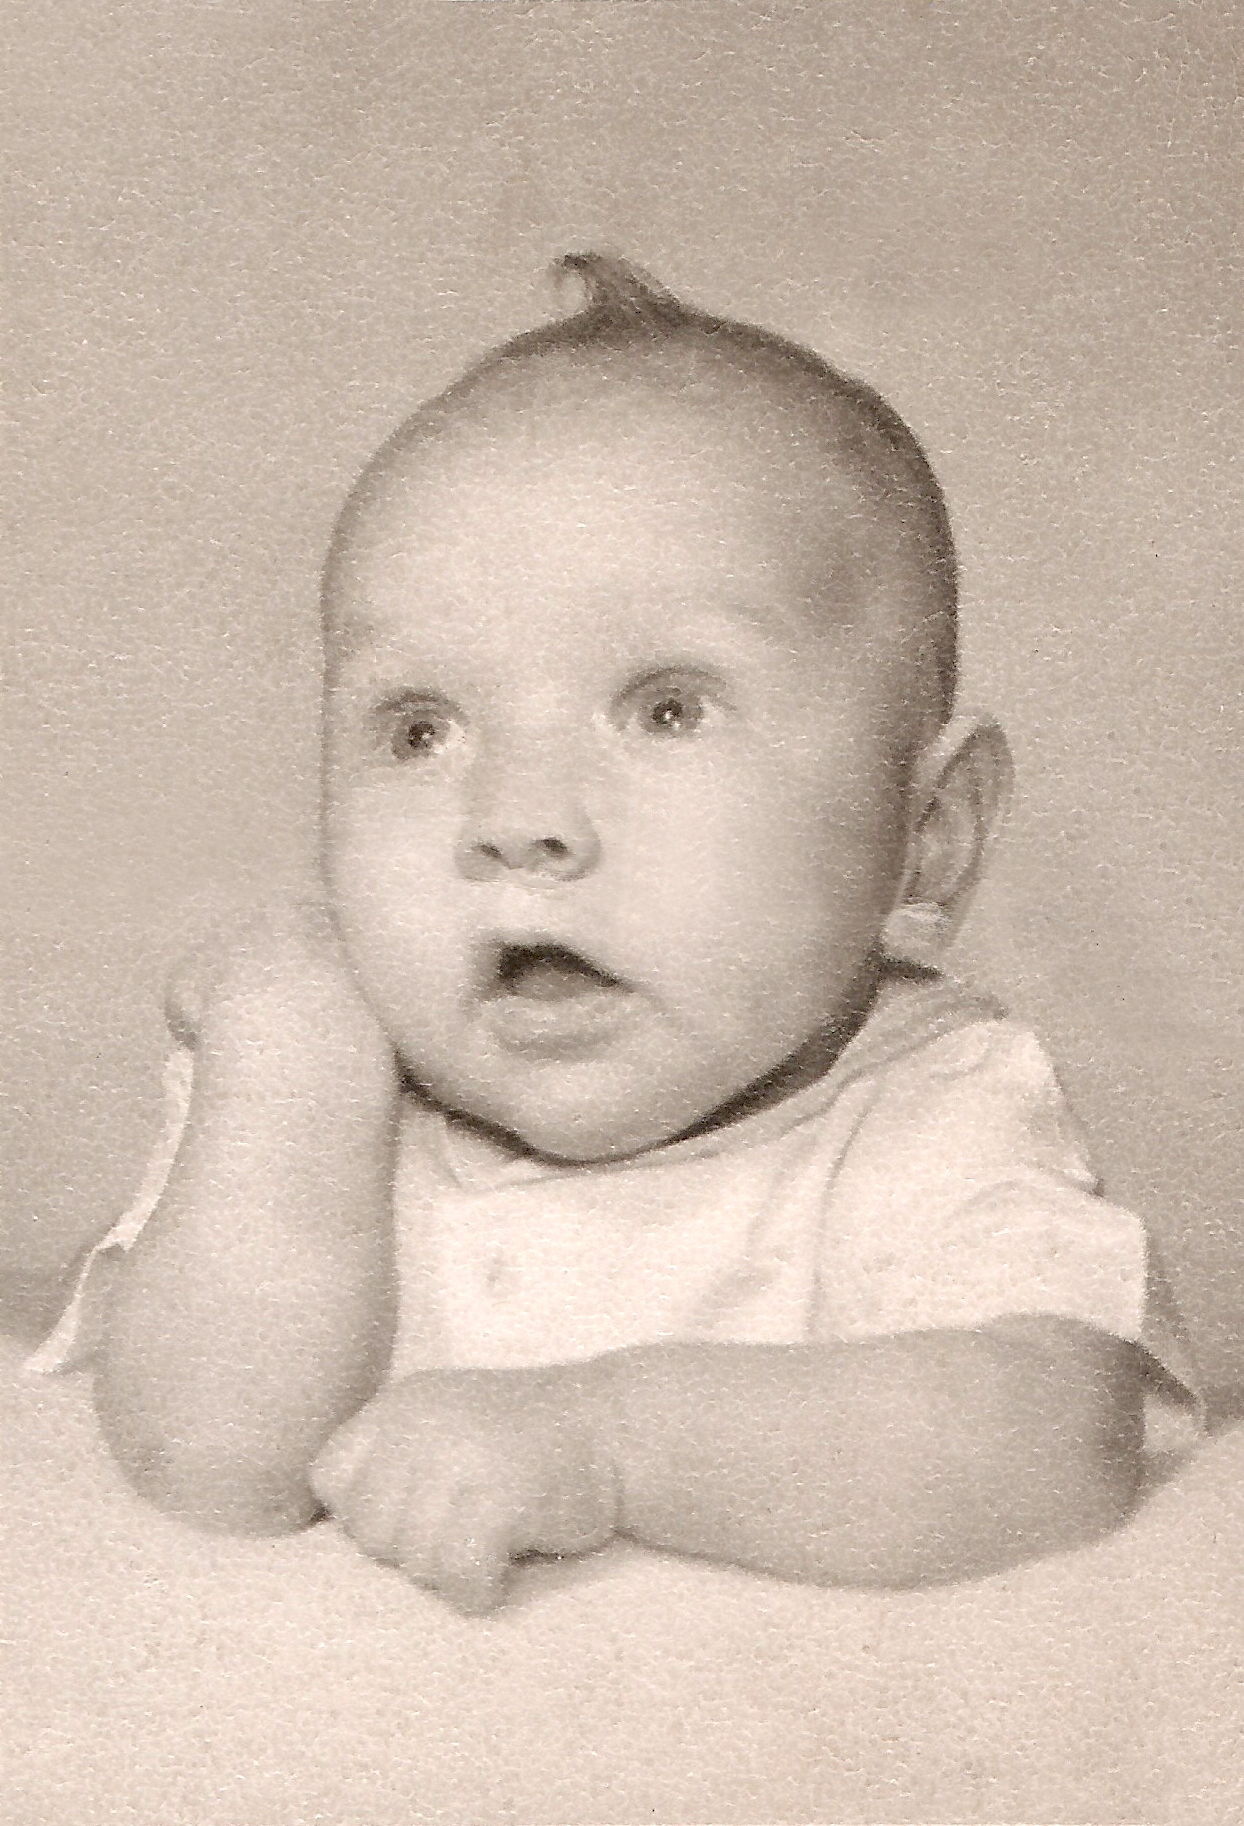 Charles Oropallo at one year old